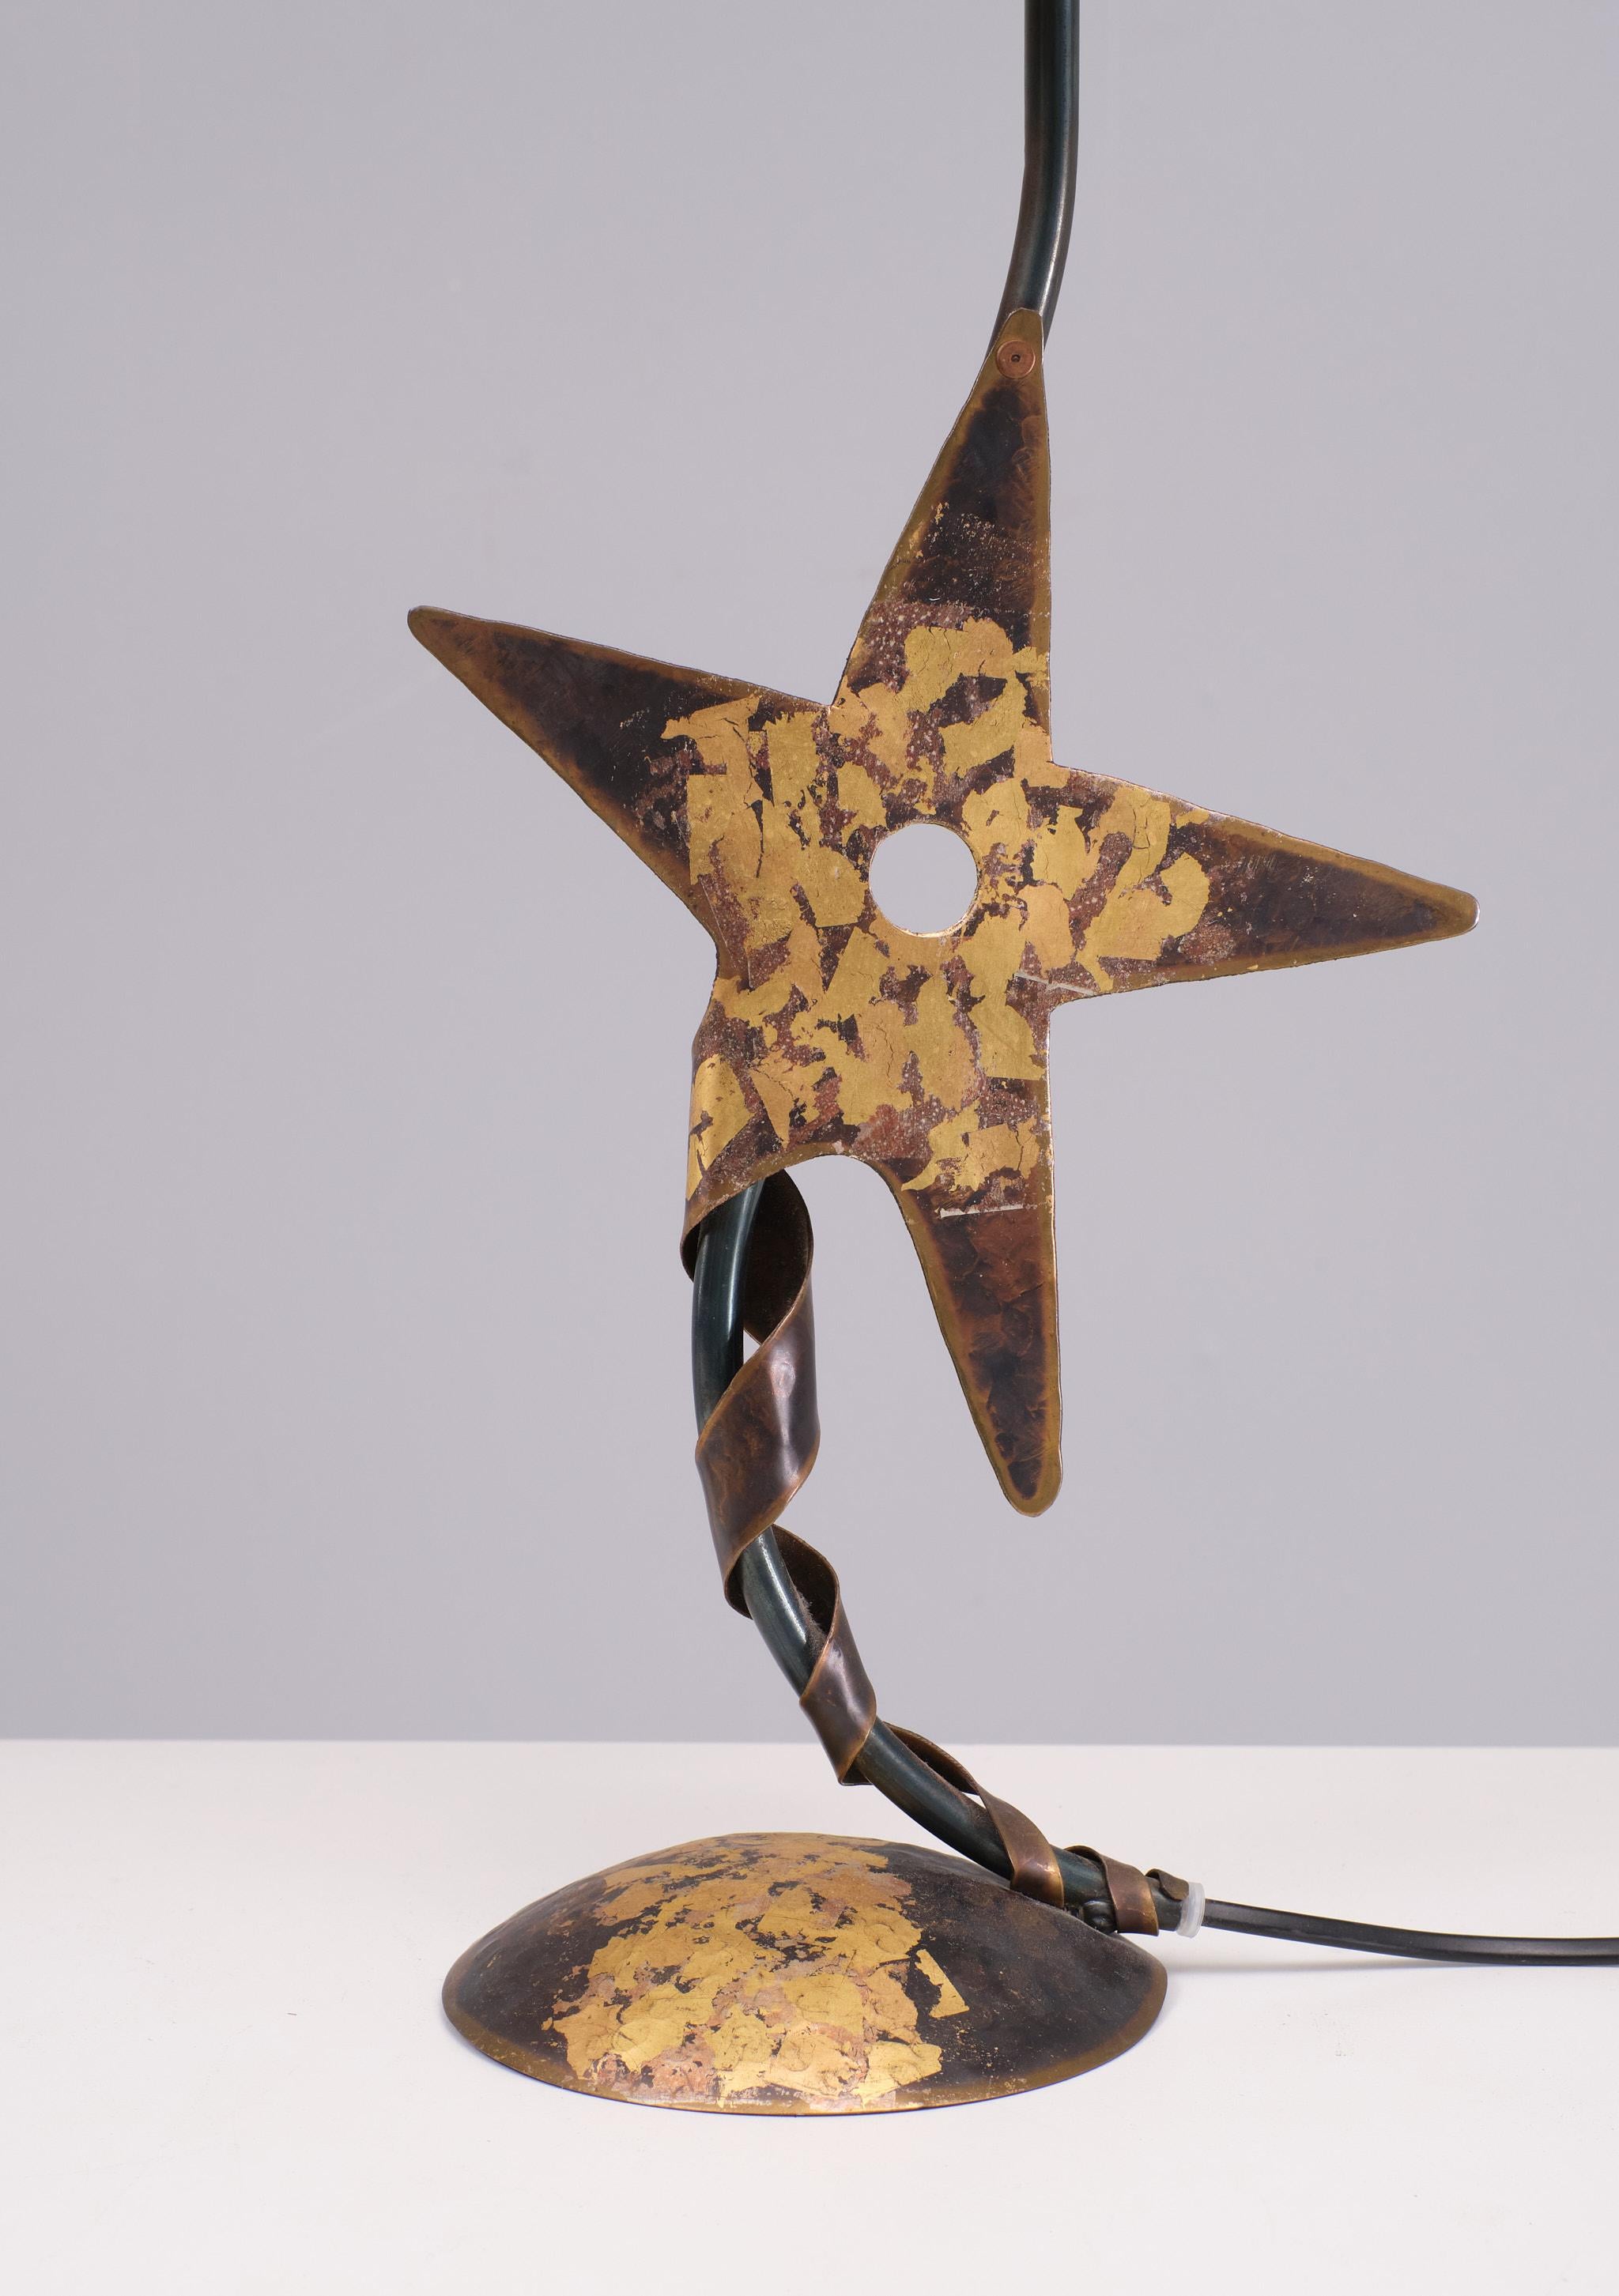 Unique  Handmade Copper table lamp . design by Robert Kostka 1980s 
France .Star shaped ,one off the punts is rapt around the base . 
unique one of piece ,comes with its original wood chip shade . 
very good condition .